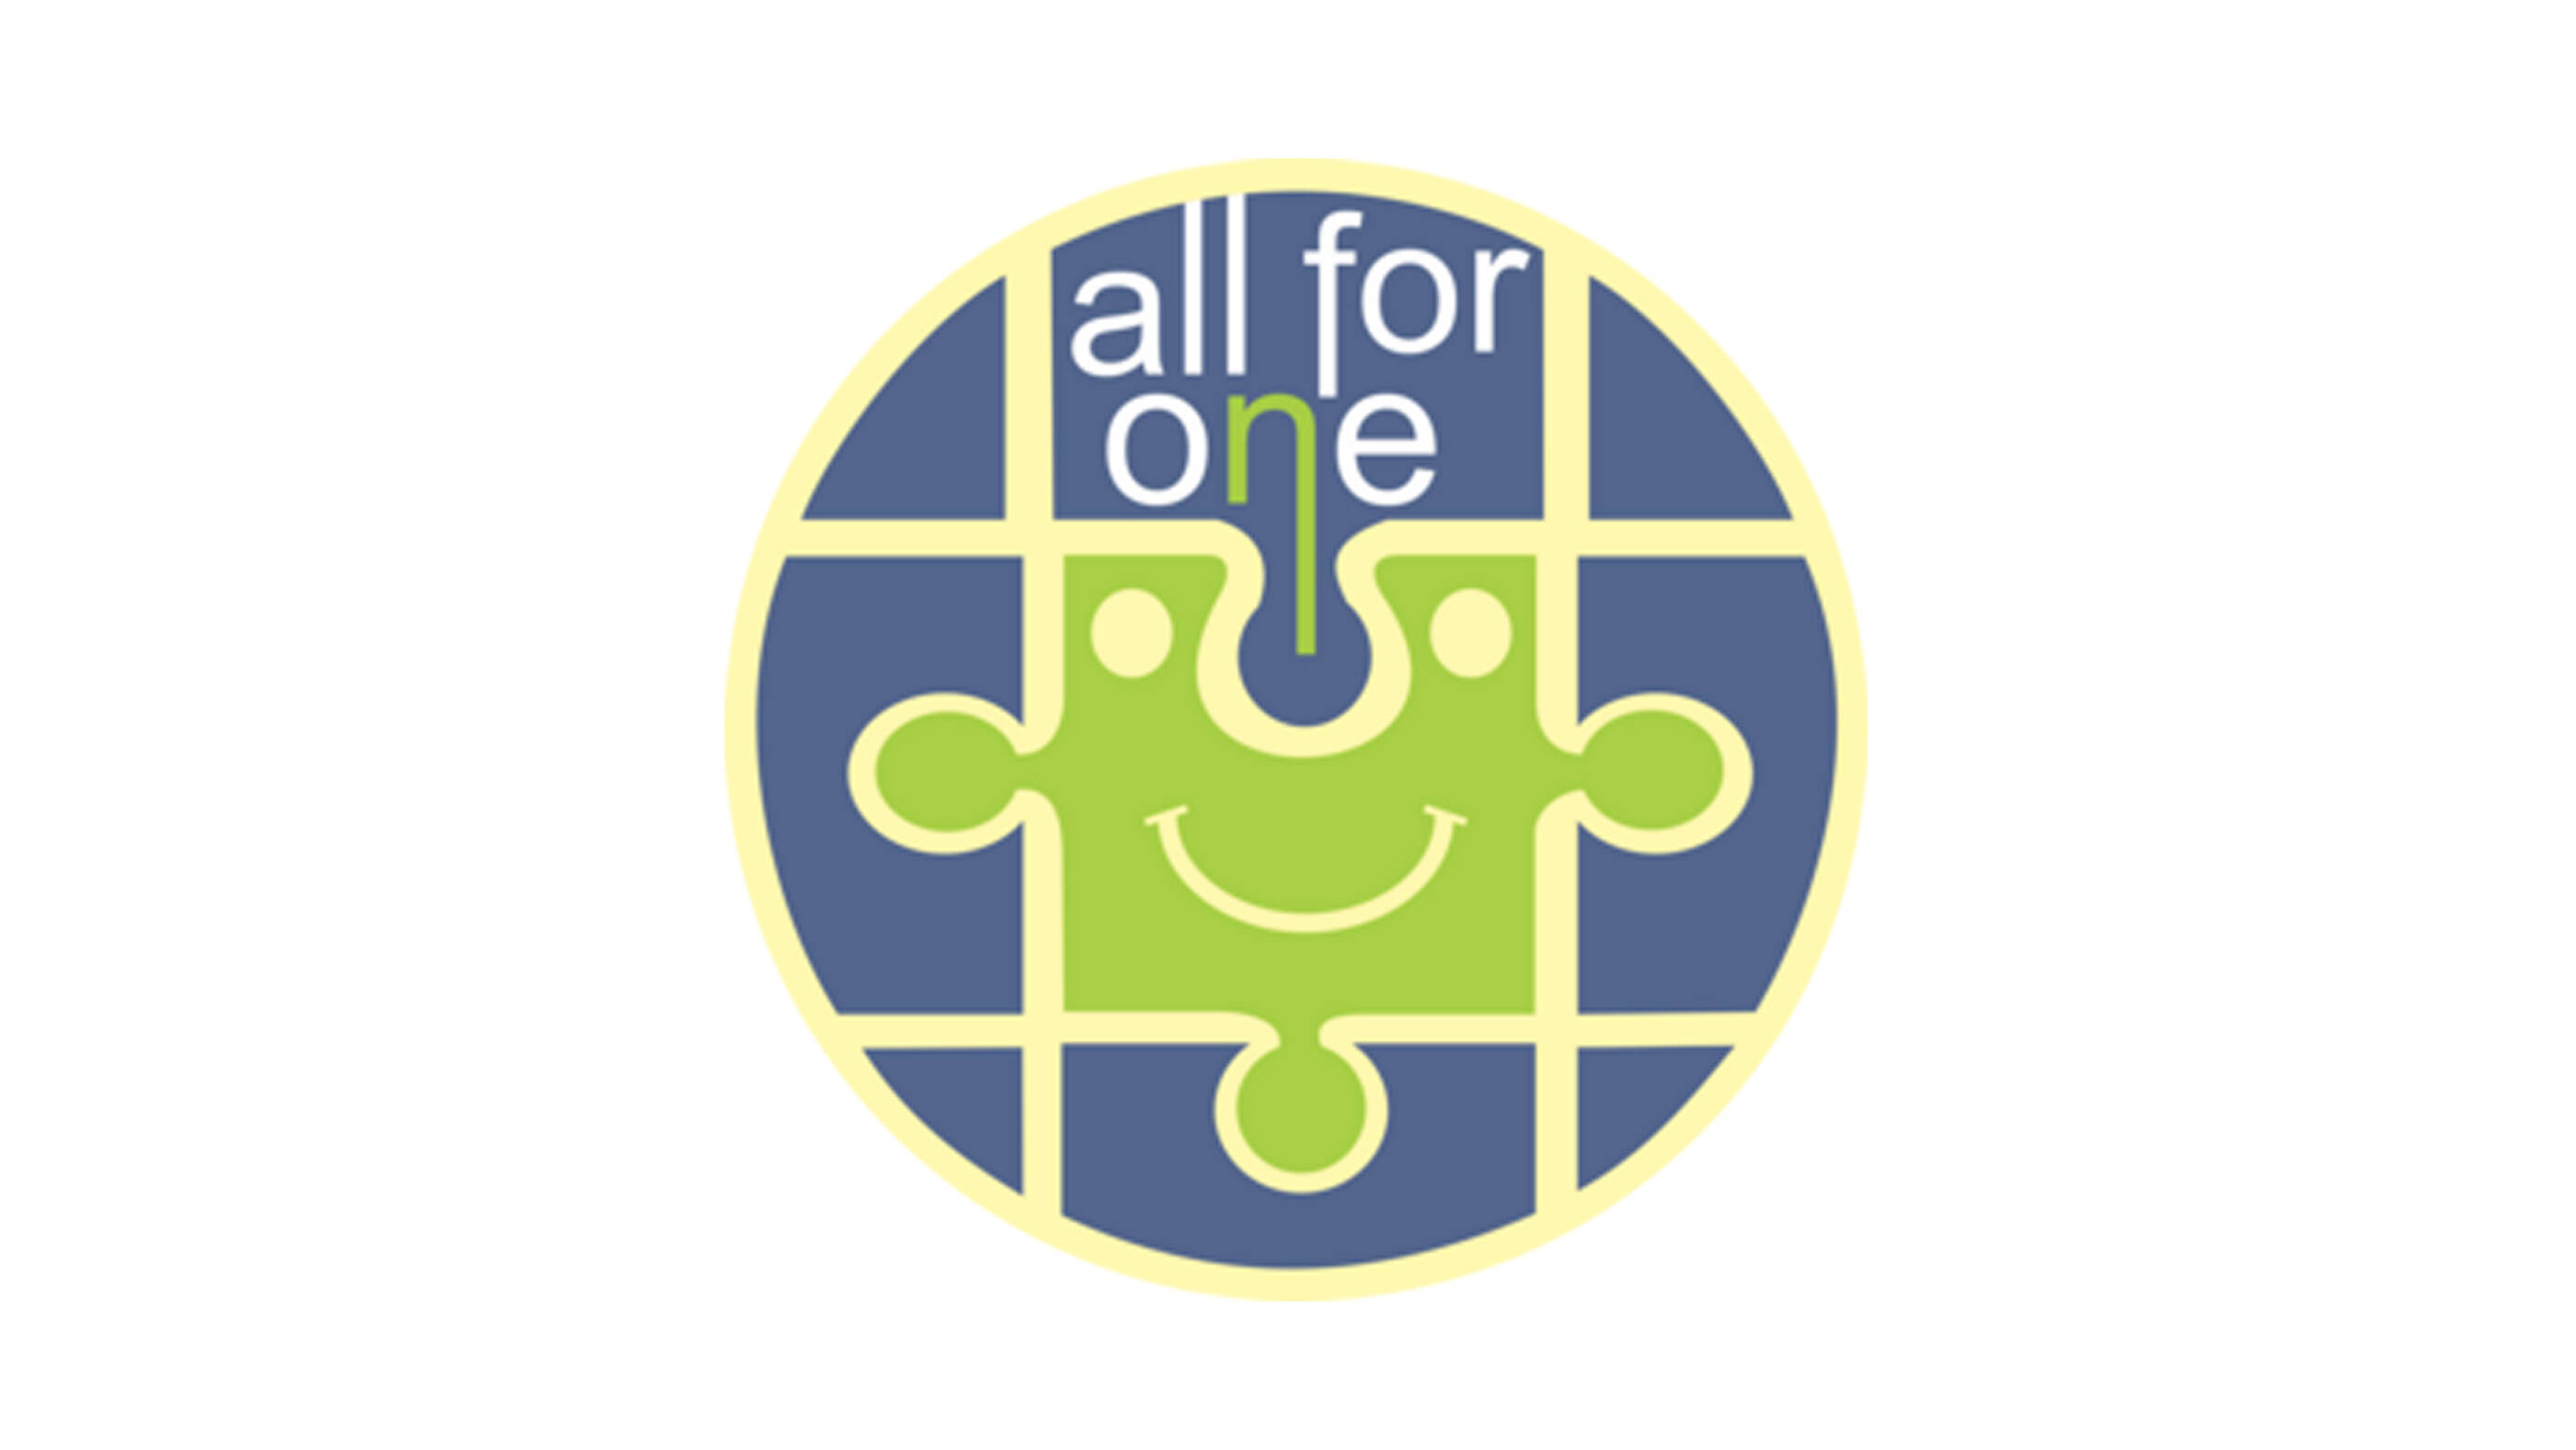 The All For One collaborates with social differences reduction and the increase of diversity, by including people with physical and mental restrictions through the Minor Apprentices Program. The objective is to provide students, monitored by their mentors, with practical training in administrative activities, which provides personal and professional development.